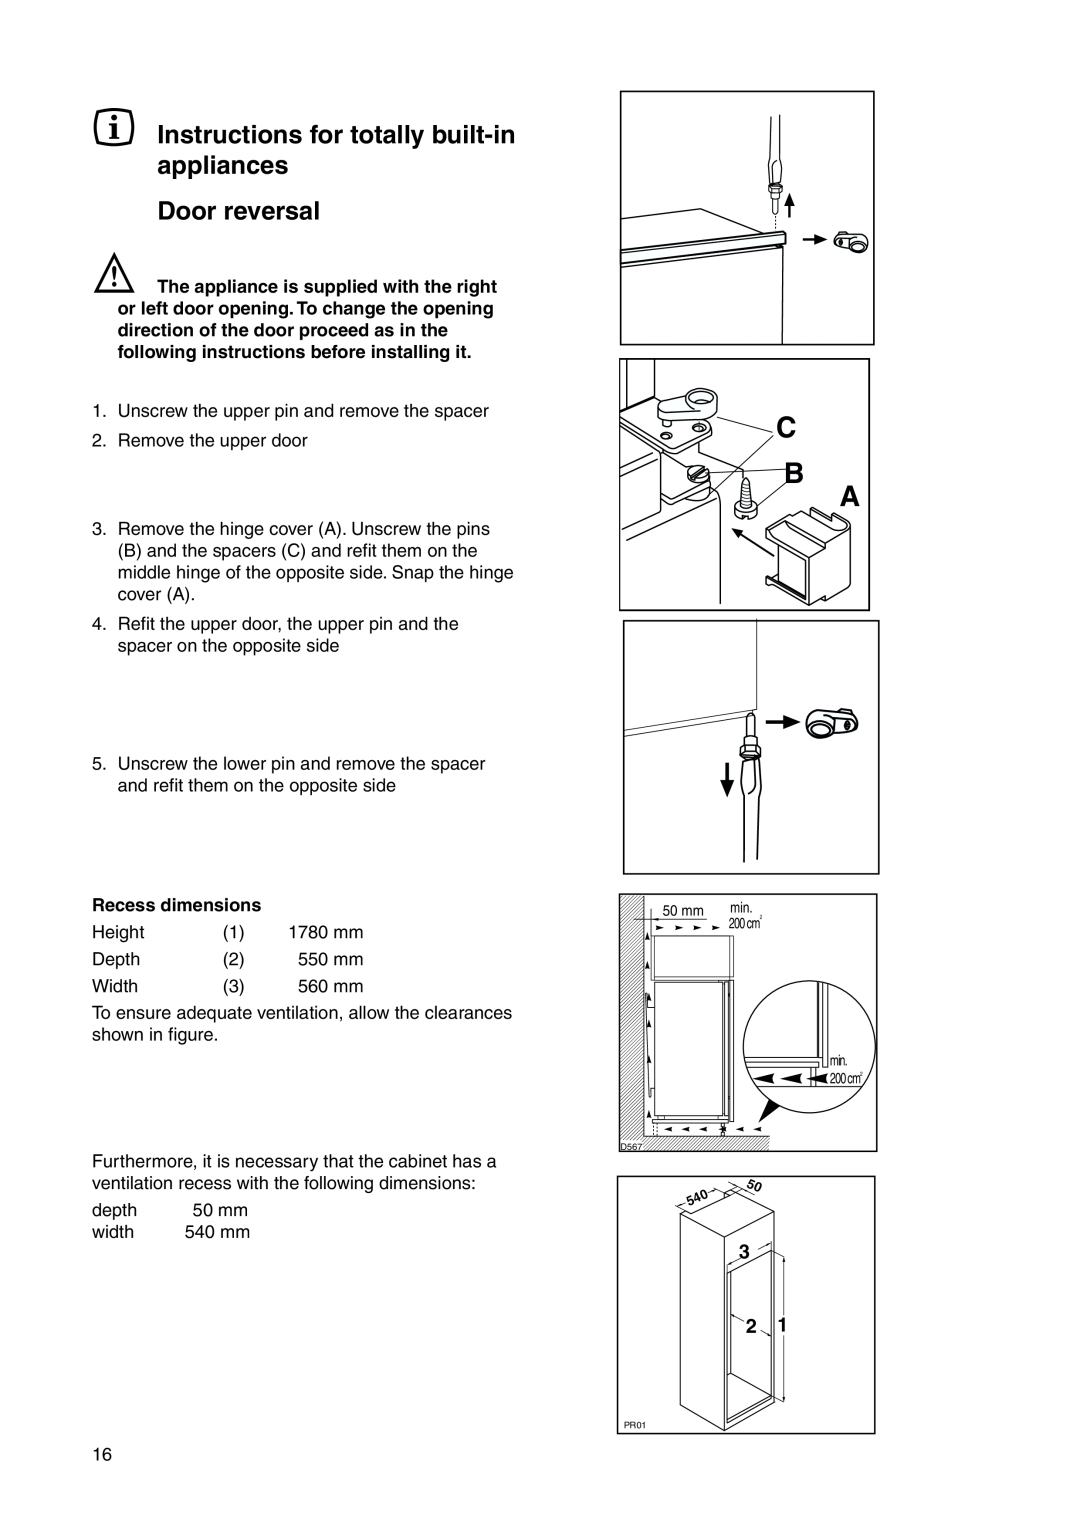 Electrolux ERF 2831 manual Instructions for totally built-in appliances Door reversal, Recess dimensions 